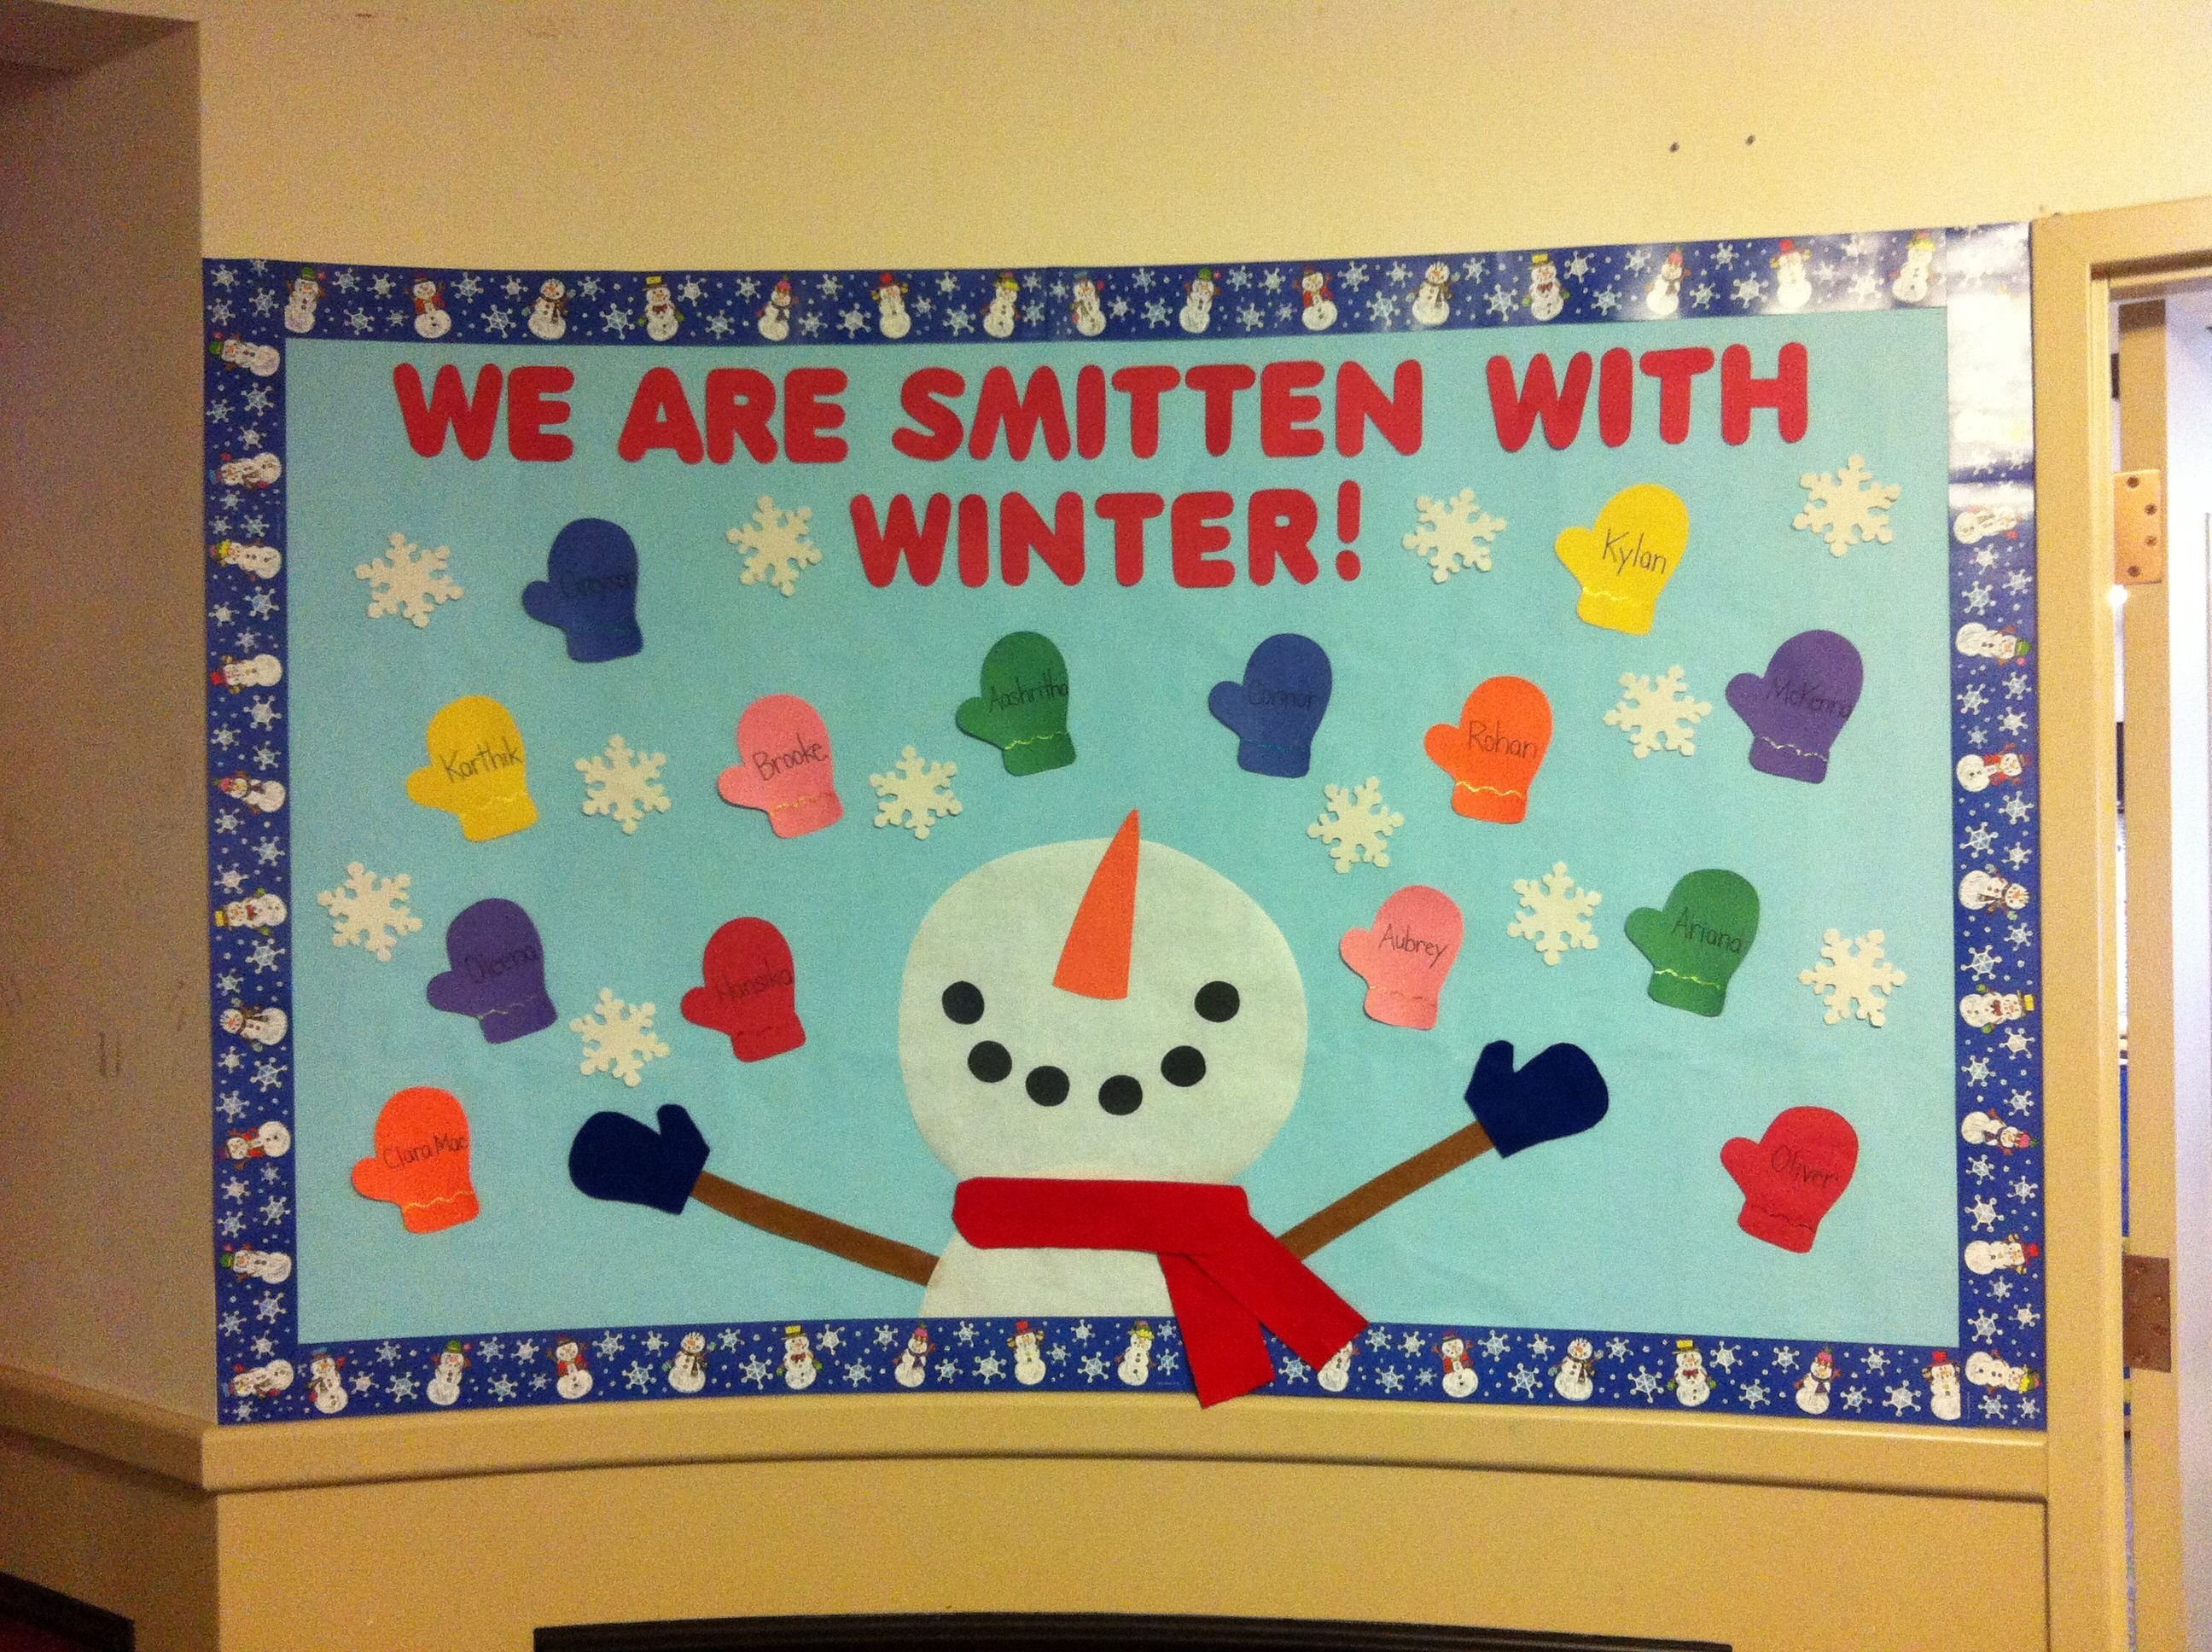 10 Fantastic Winter Bulletin Board Ideas Elementary School winter bulletin board we are smitten with winter and the mittens 2022